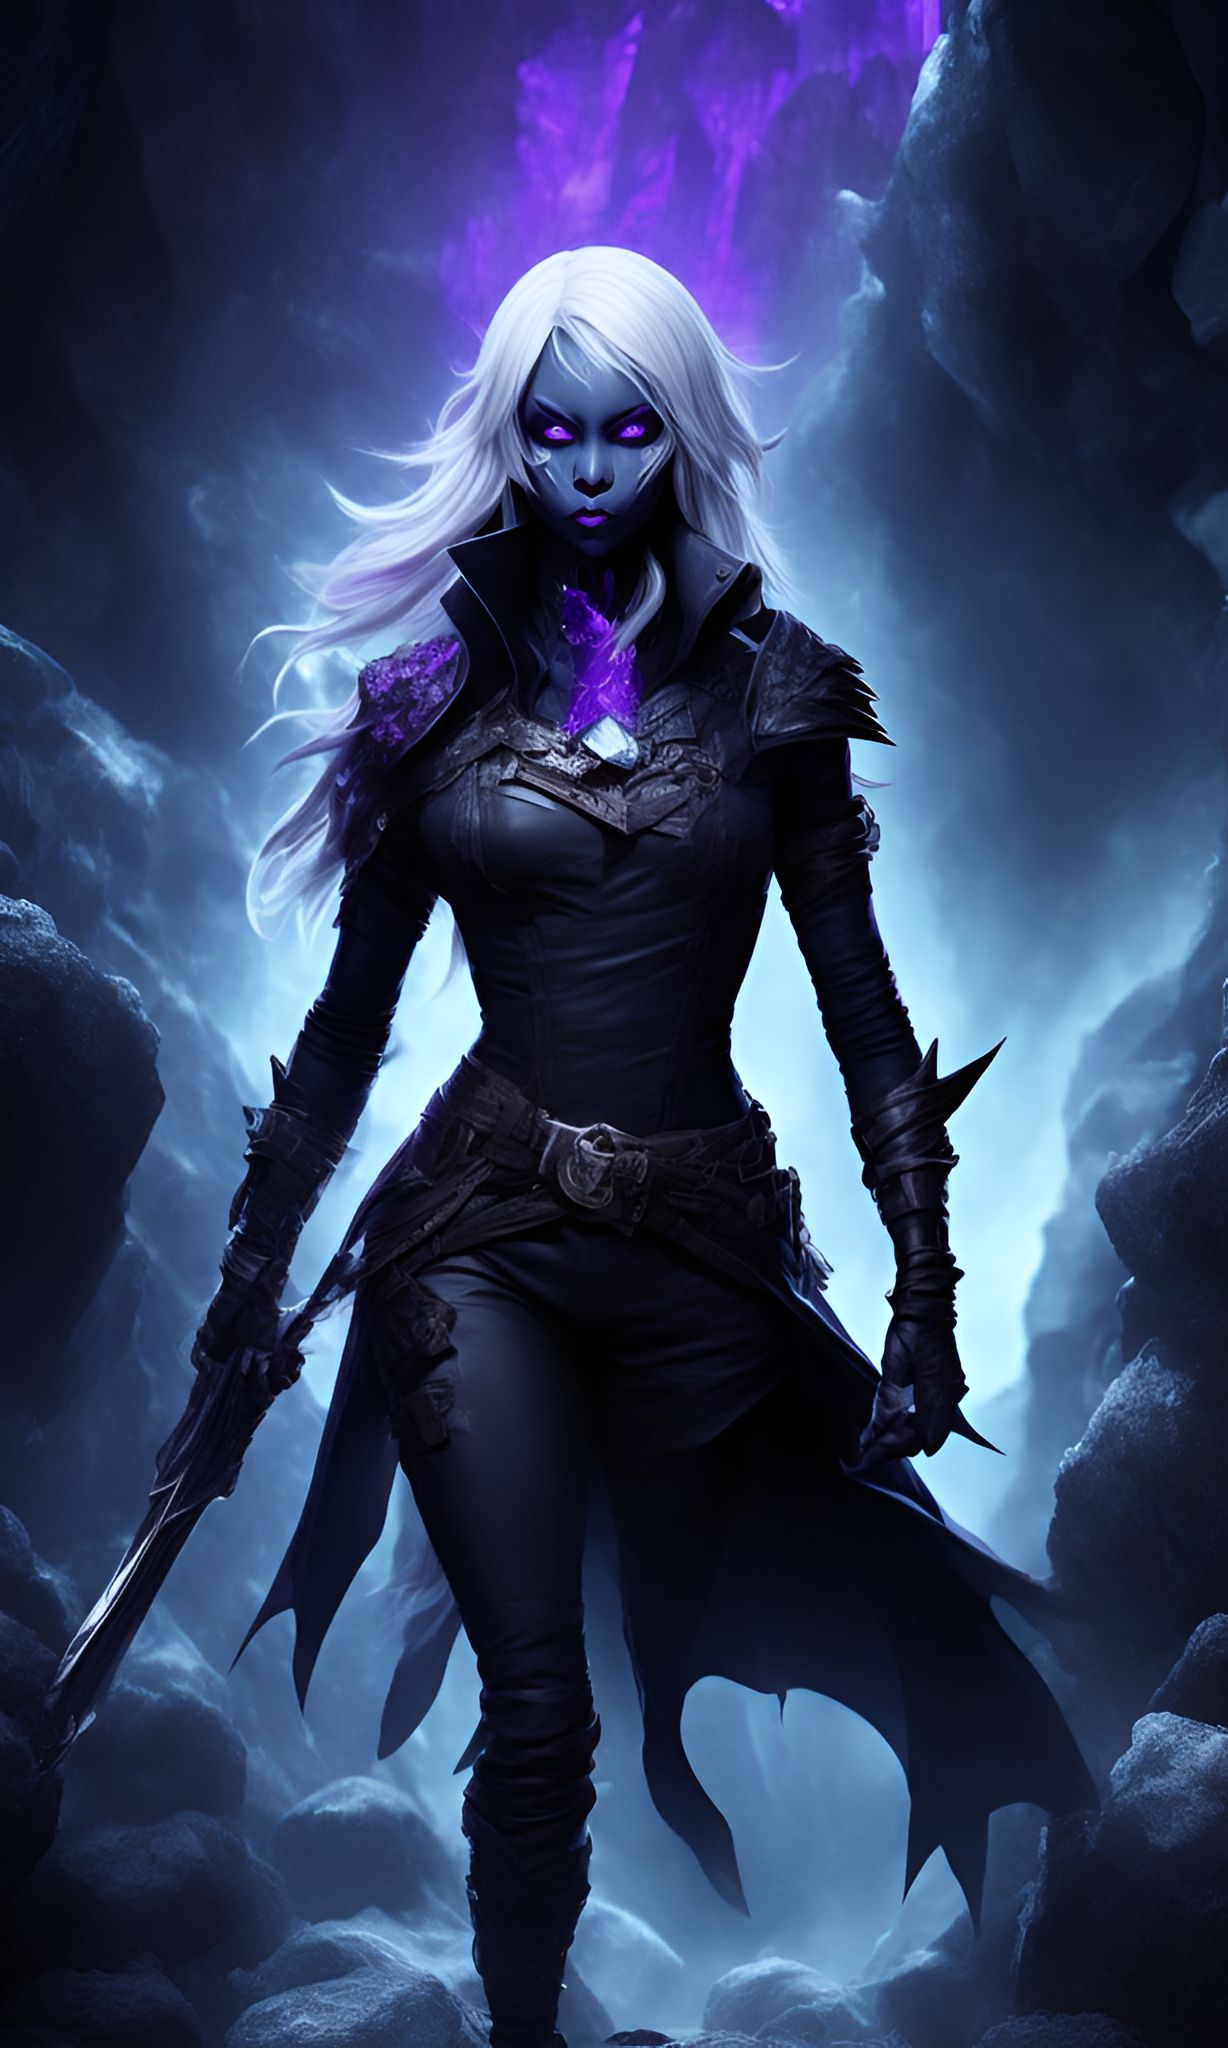 Drow, tattered black leather clothing, photography taken by canon eos r5, stunning fullbody d&d character art, female drow rogue with glossy white hair, purple eyes, dark purple skin, wielding a silver dagger, wears very look good outfit, Detailed face, beautiful eyes and hair, soft makeup and draw thin eyebrows, Human-like eyes, good anatomy, Perfect white balance, rim lighting uhd, prime photography, smooth crisp line quality, Gritty, in front of glowing crystal rocks, In an underground cavern